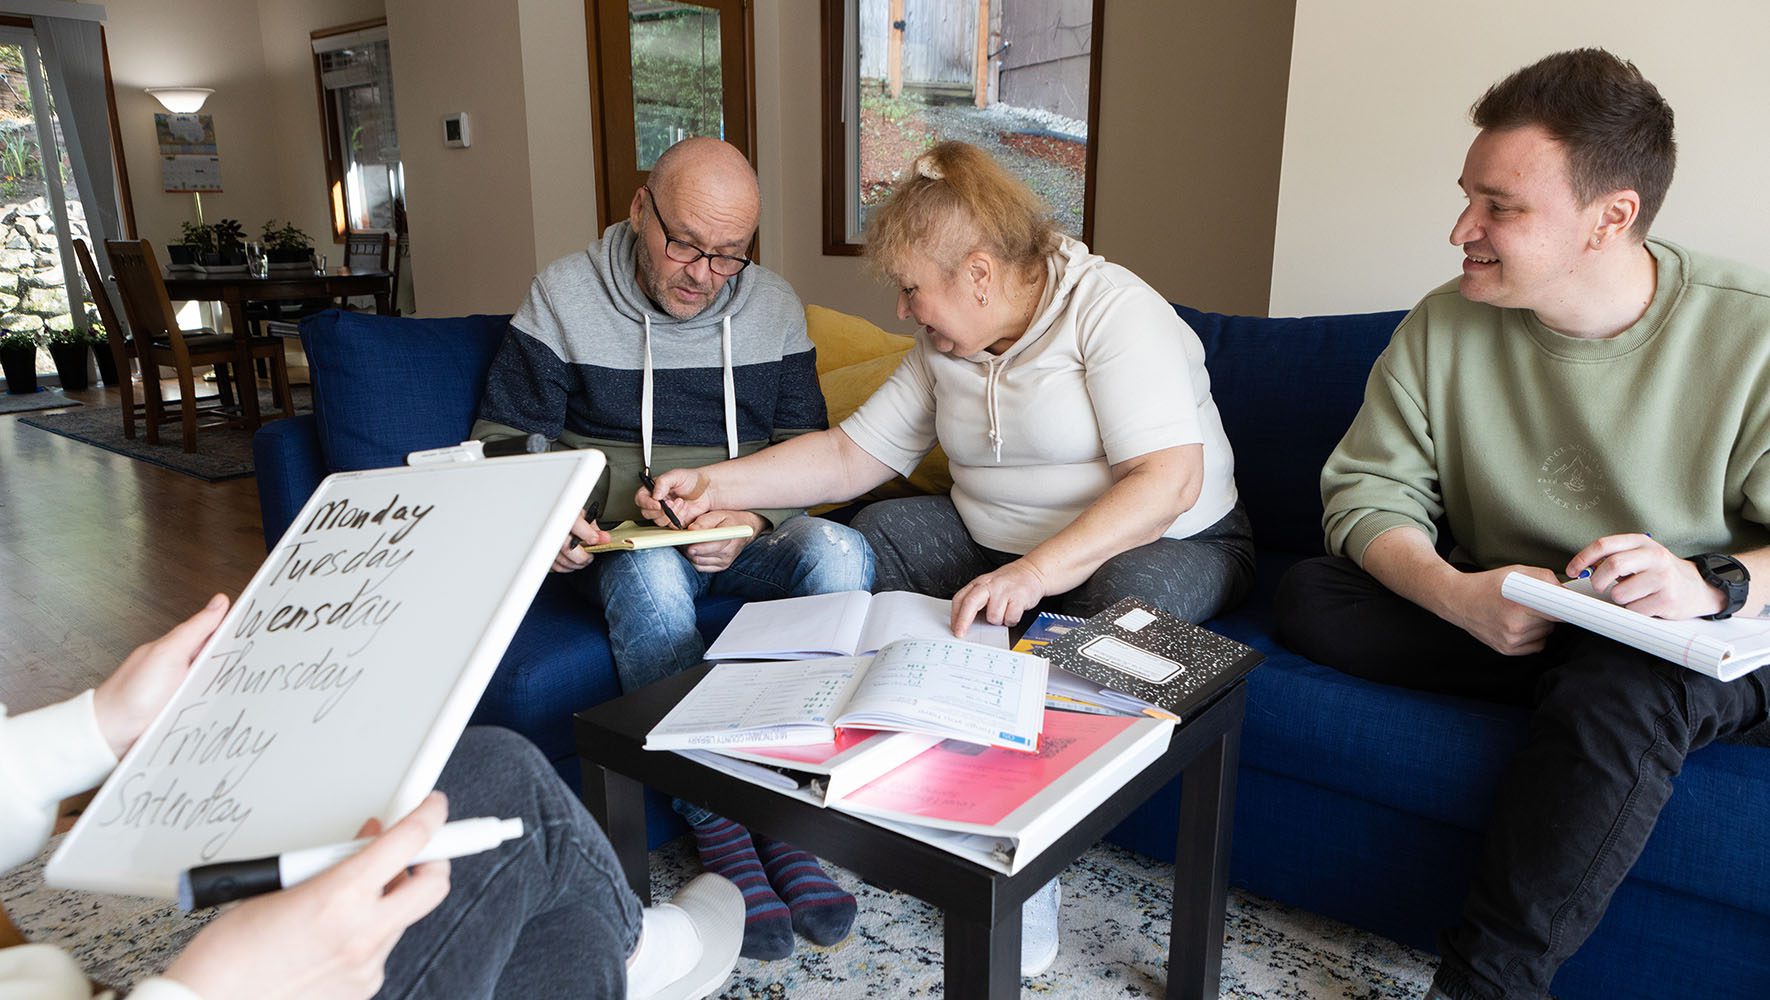 Tamila Kusharova, center, helps her husband Oleksandr with spelling days of the week in English during an impromptu English practice at their home.| In Time for Passover, Ukrainians Find Jewish Community in U.S. | HIAS